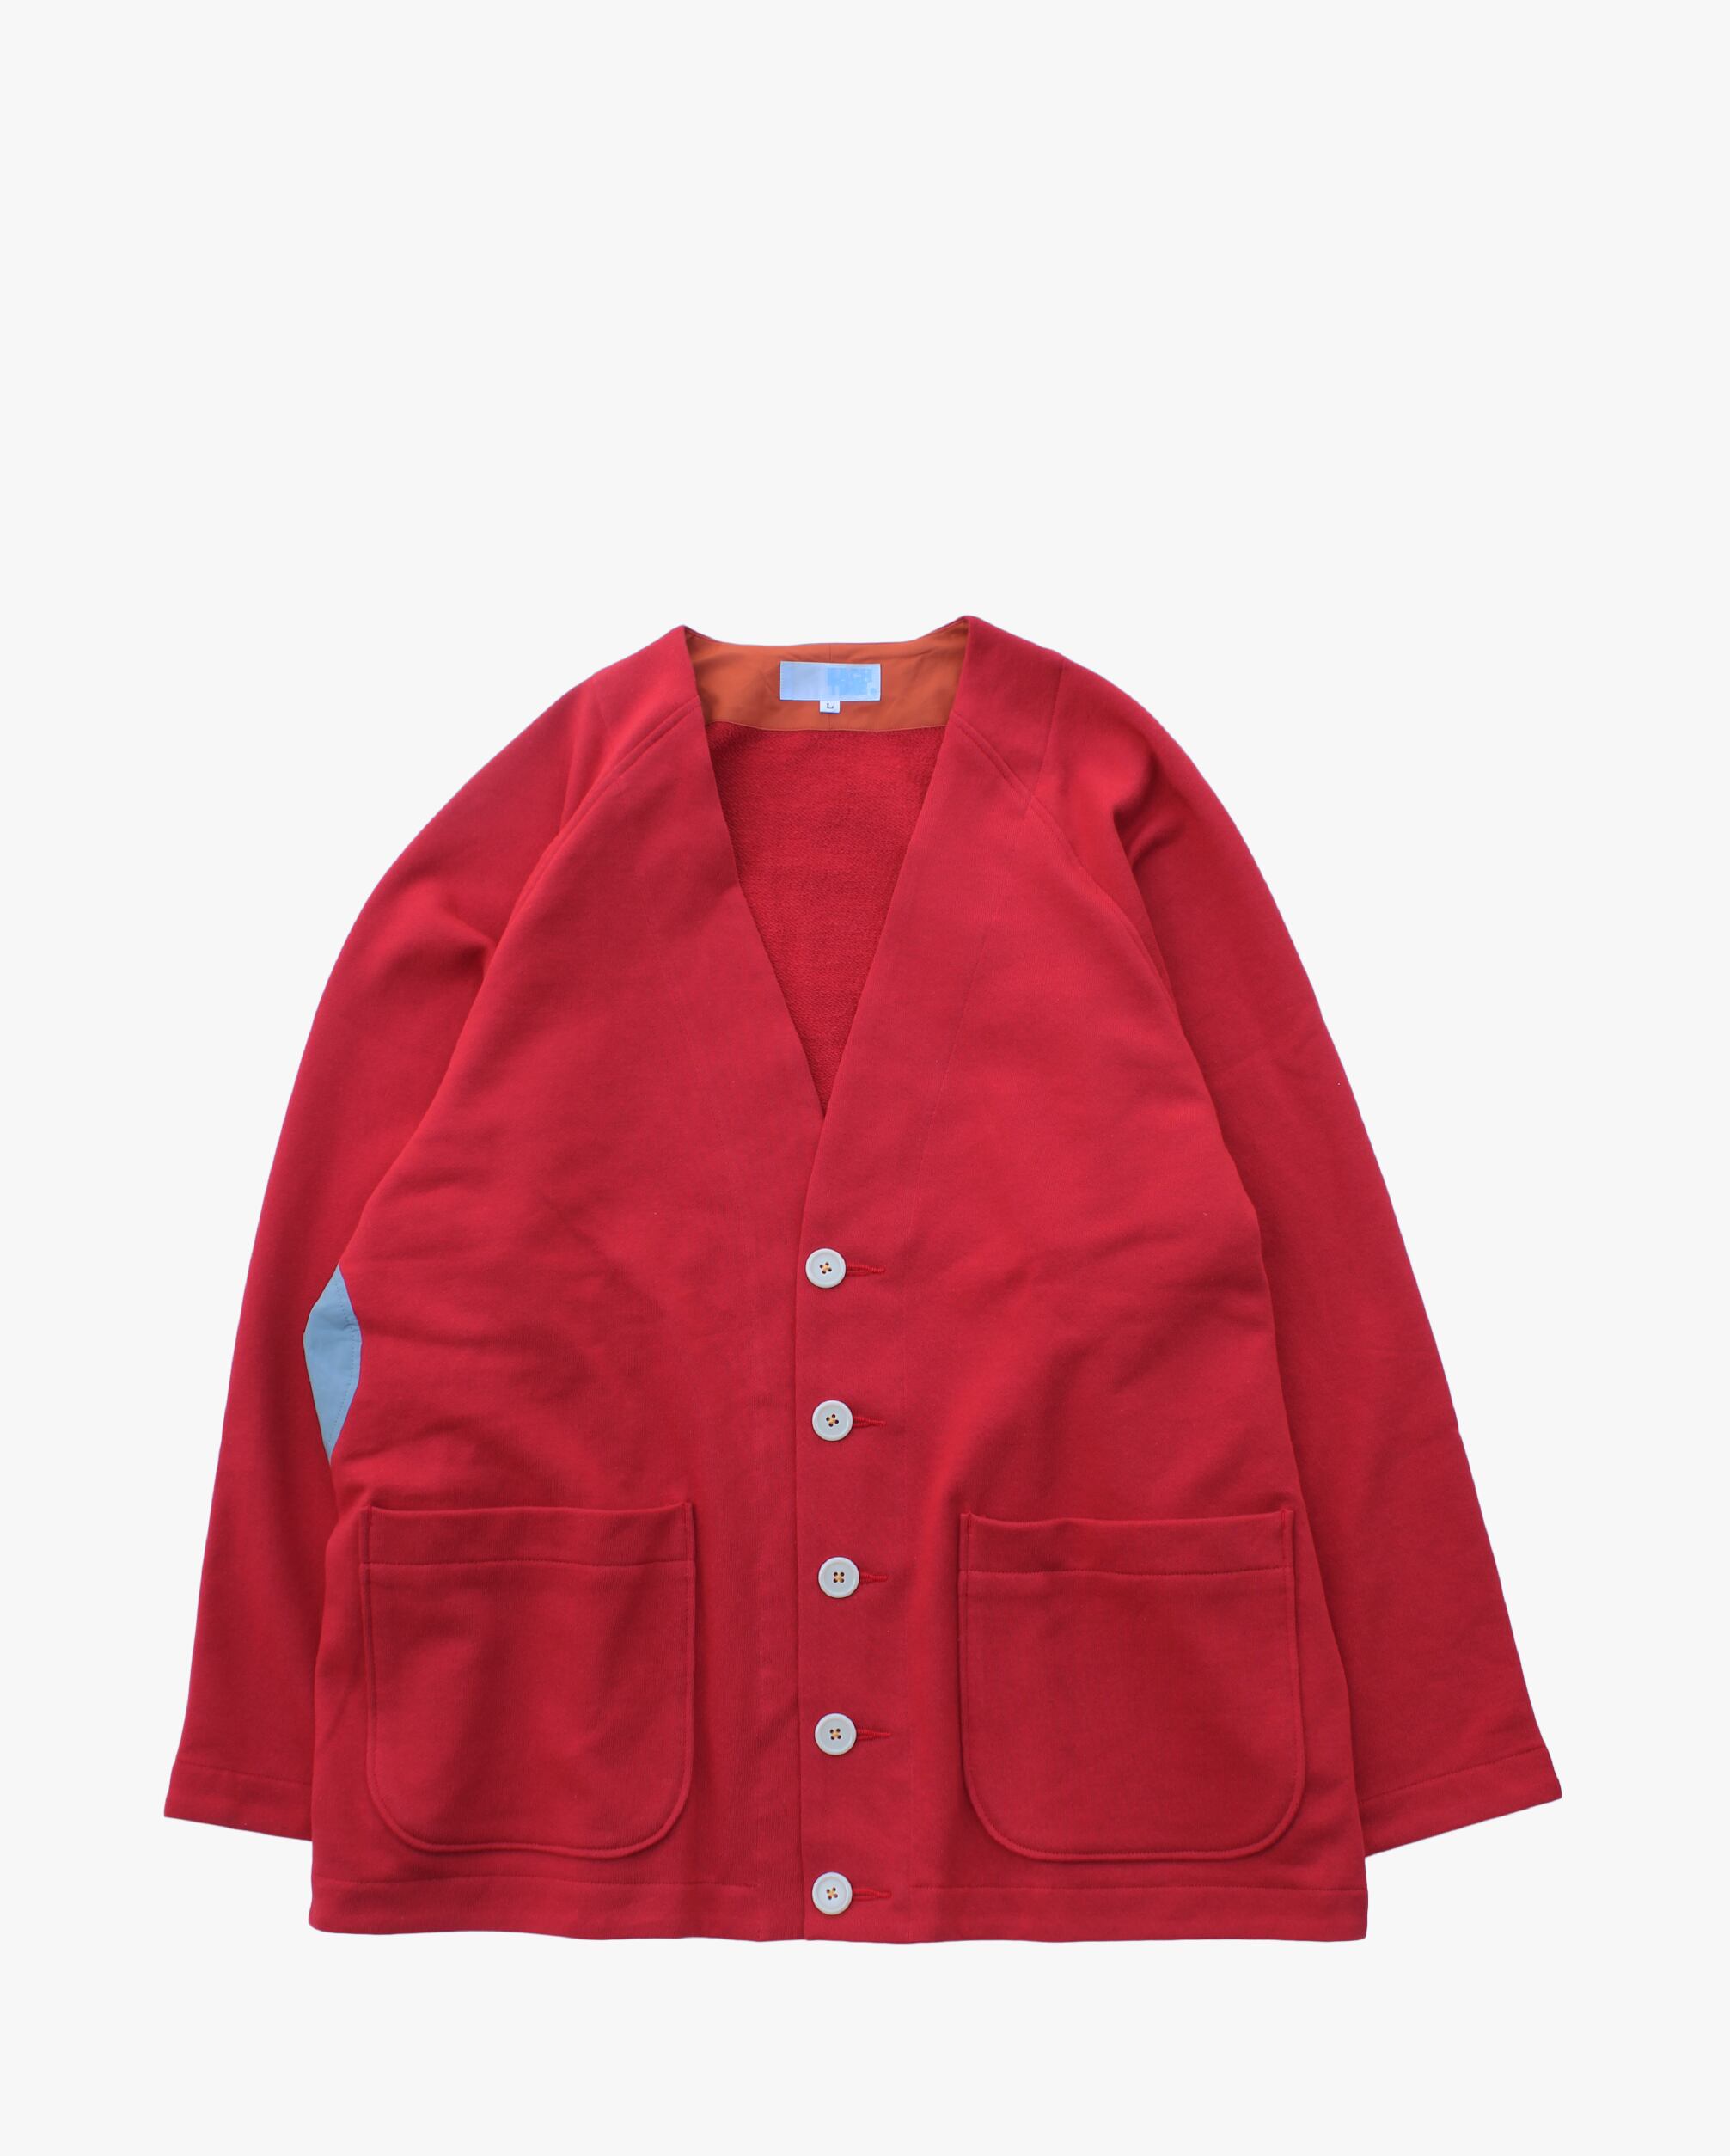 EACHTIME. Sweat Cardigan Red